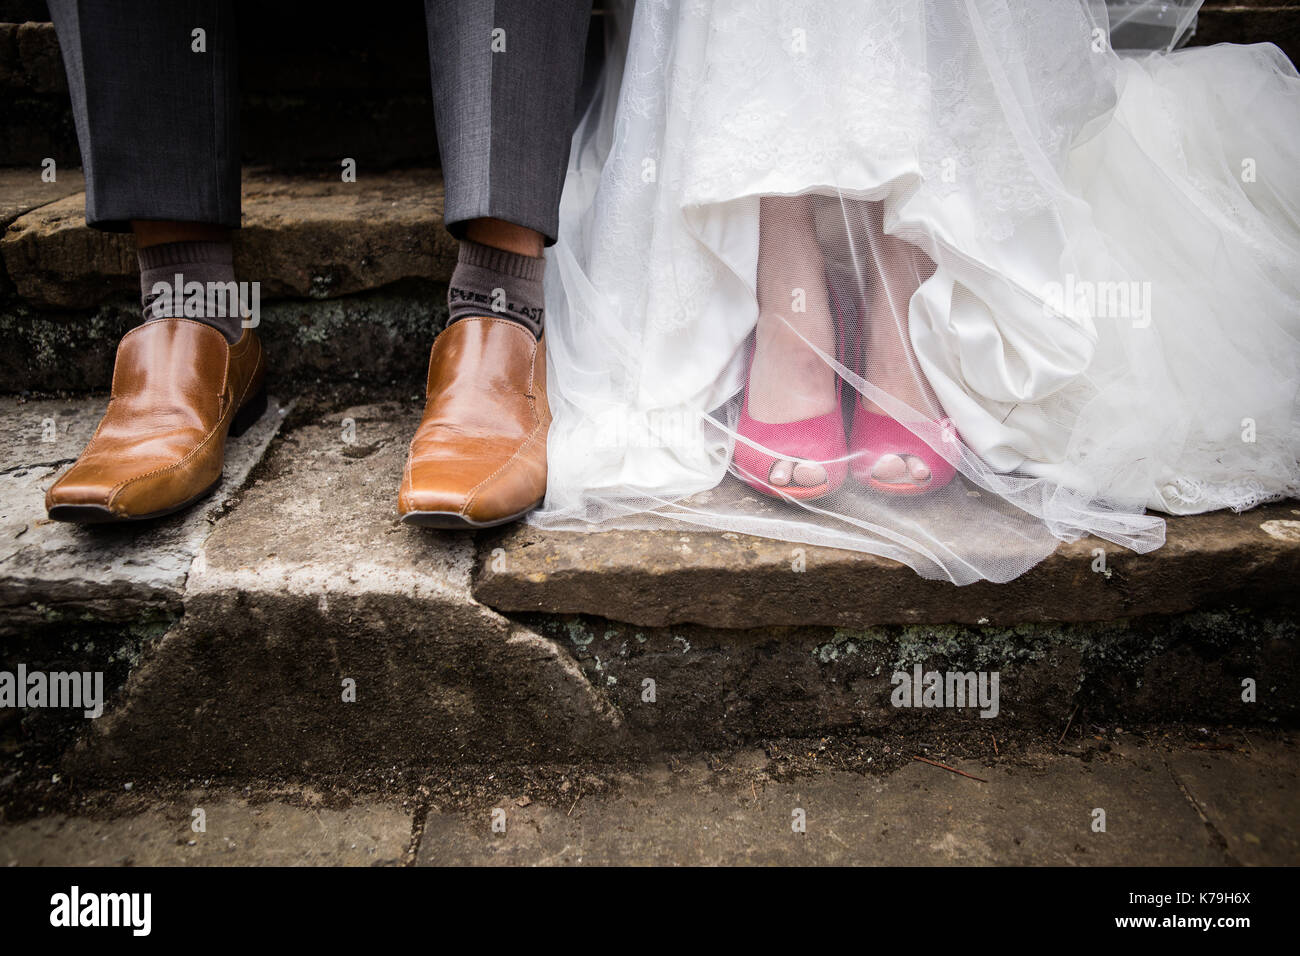 Bride and groom cool shoes Stock Photo